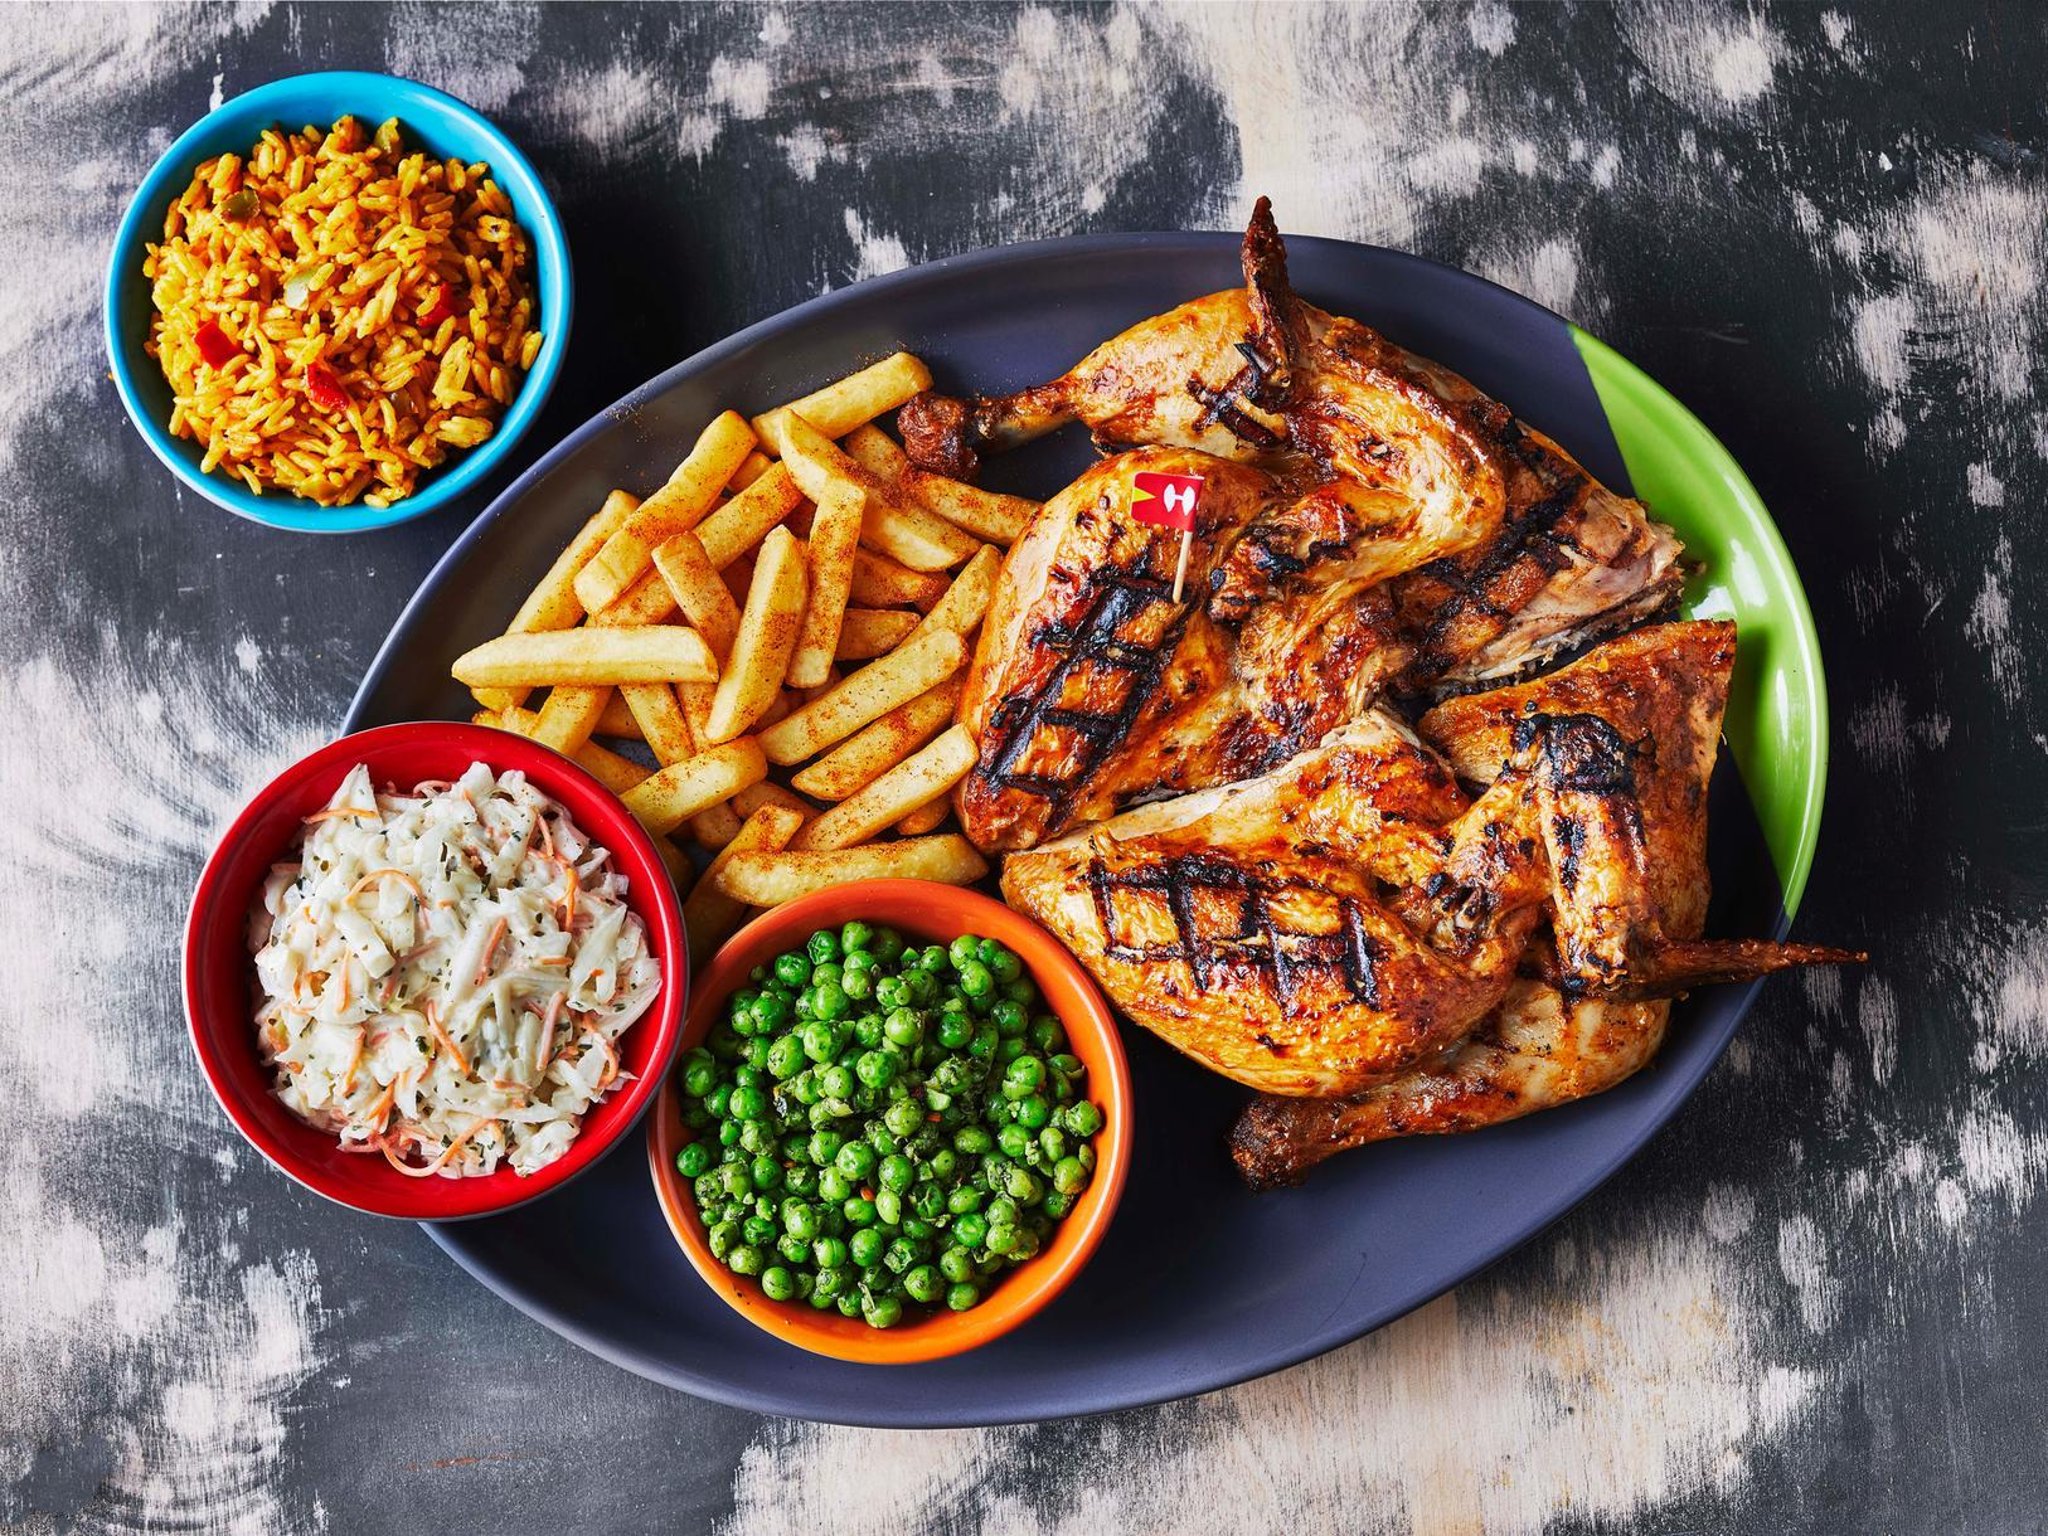 Nando’s Offer 50% Discount to Anyone Who Brings Their Nan.